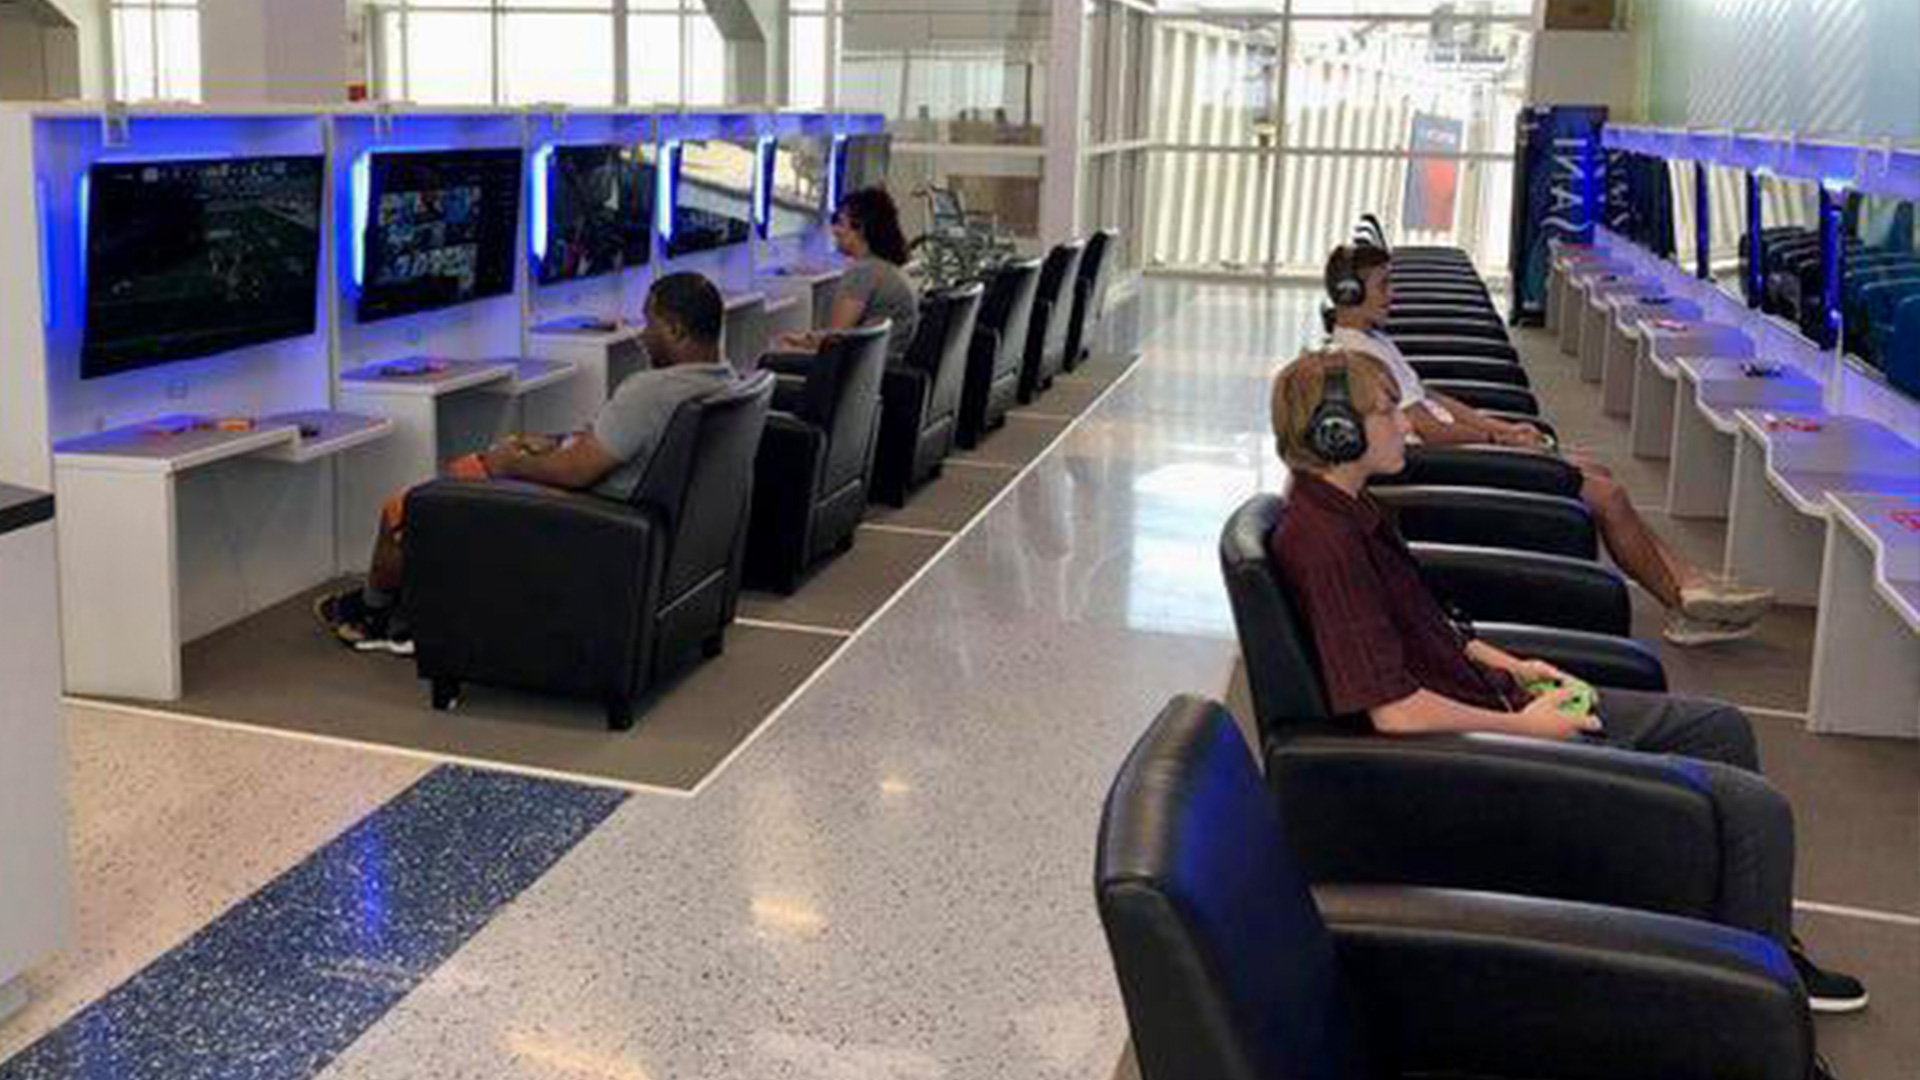 This is the most beautiful airport in the world. The Texas departures lounge has a gaming room with 22 consoles.